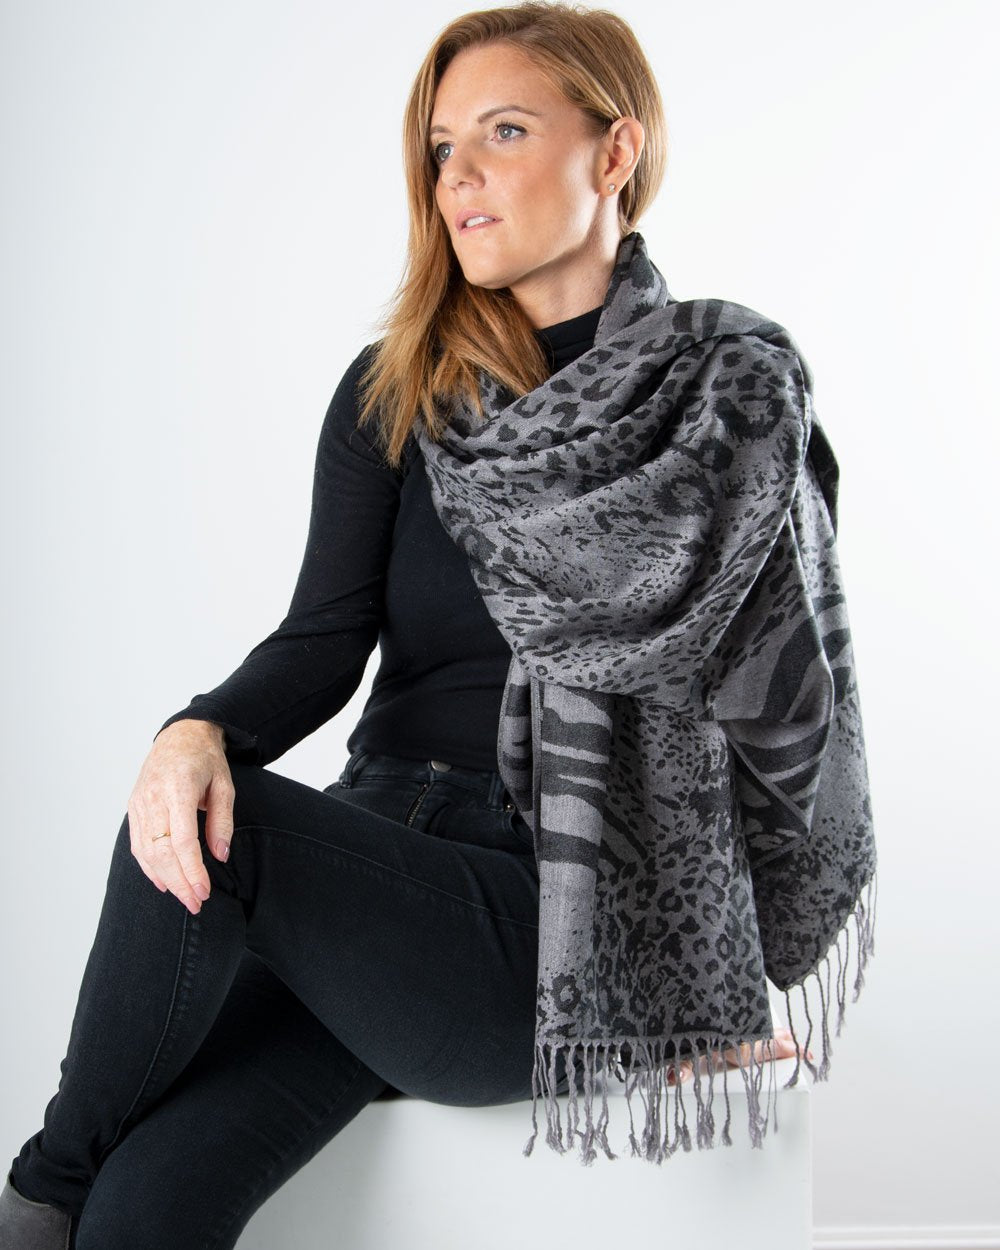 an image showing a silver and black animal print patterned pashmina